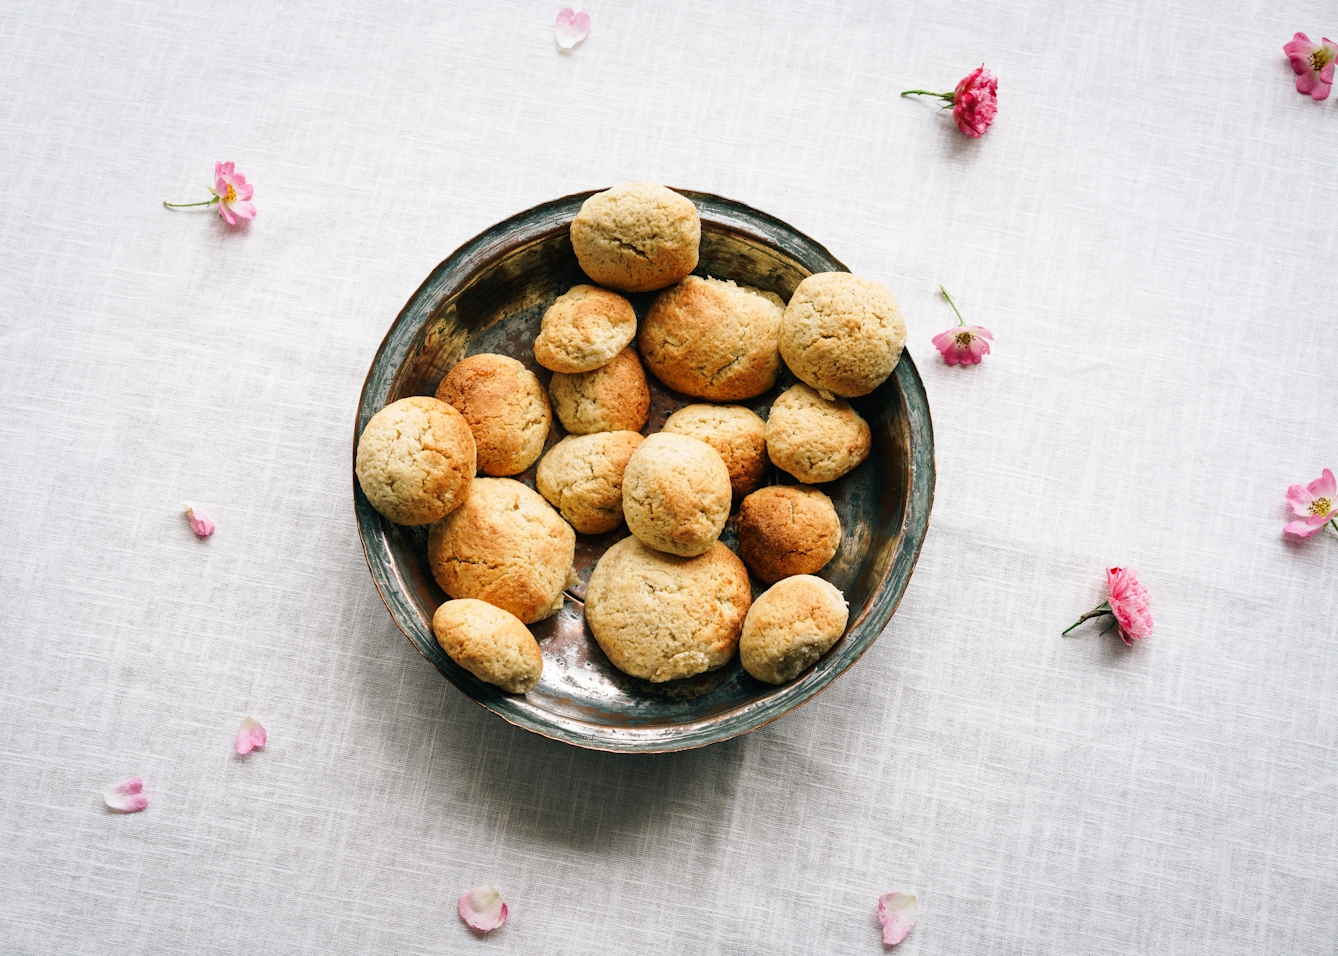 Photograph of 16 golden backed balls made of a sort of dough, piled in a dark ceramic bowl, viewed from above. The bowl stands on a white linen tablecloth, which is scattered in flower heads and petals.